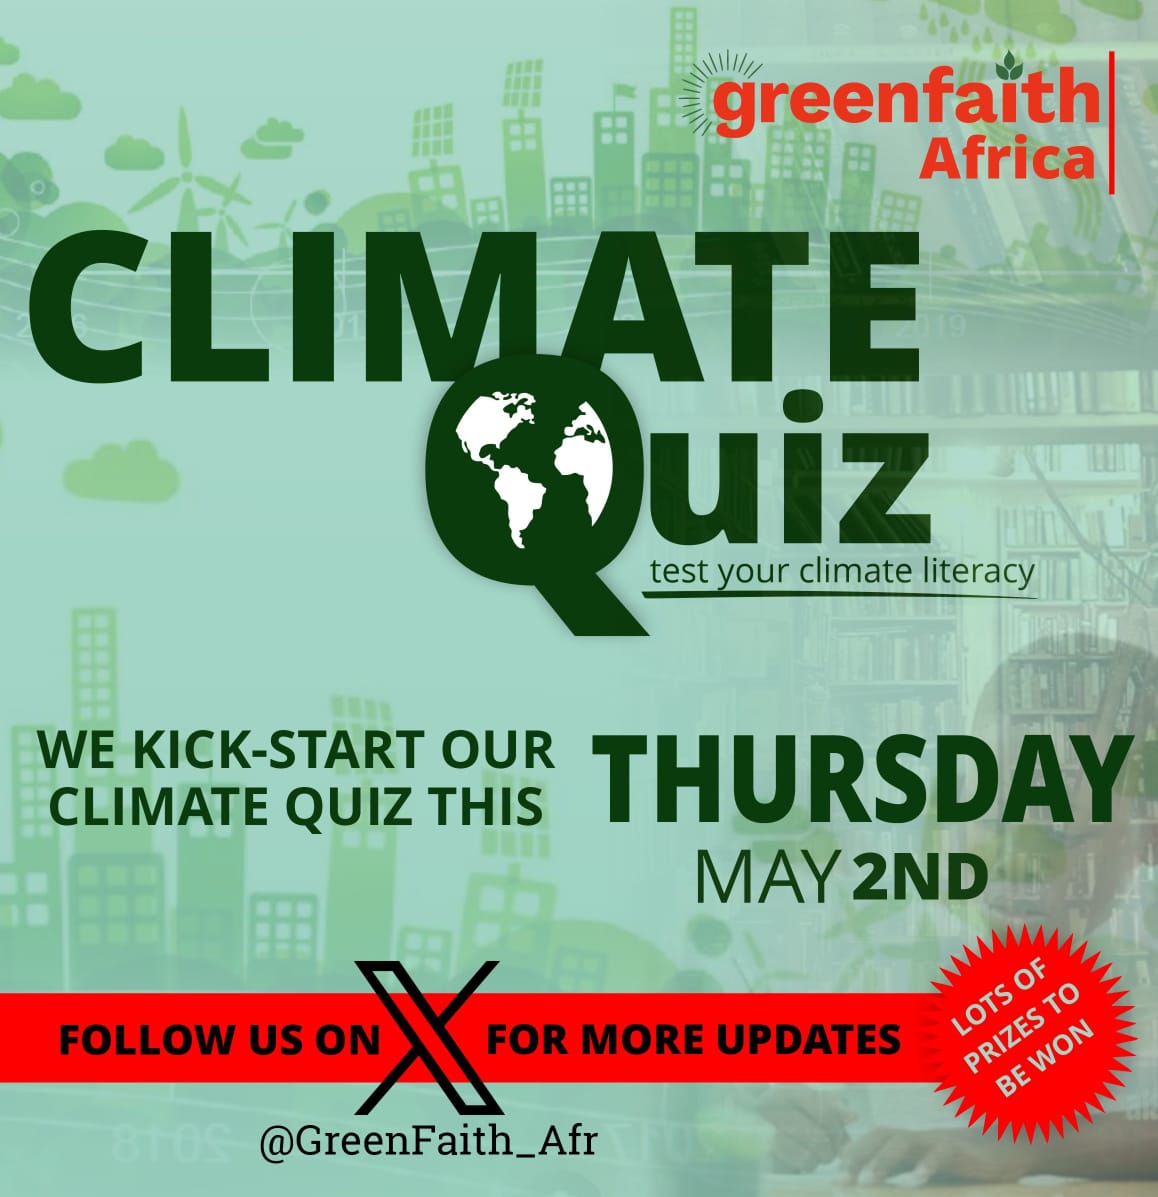 Introducing THE CLIMATE QUIZ. In this weekly challenge, we test our climate literacy while winning at the same time Watch out for 1. Greenfaith Branded Water bottles 2.GreenFaith Branded Notebooks 3.GreenFaith Branded T-shirts #Faiths4Climate